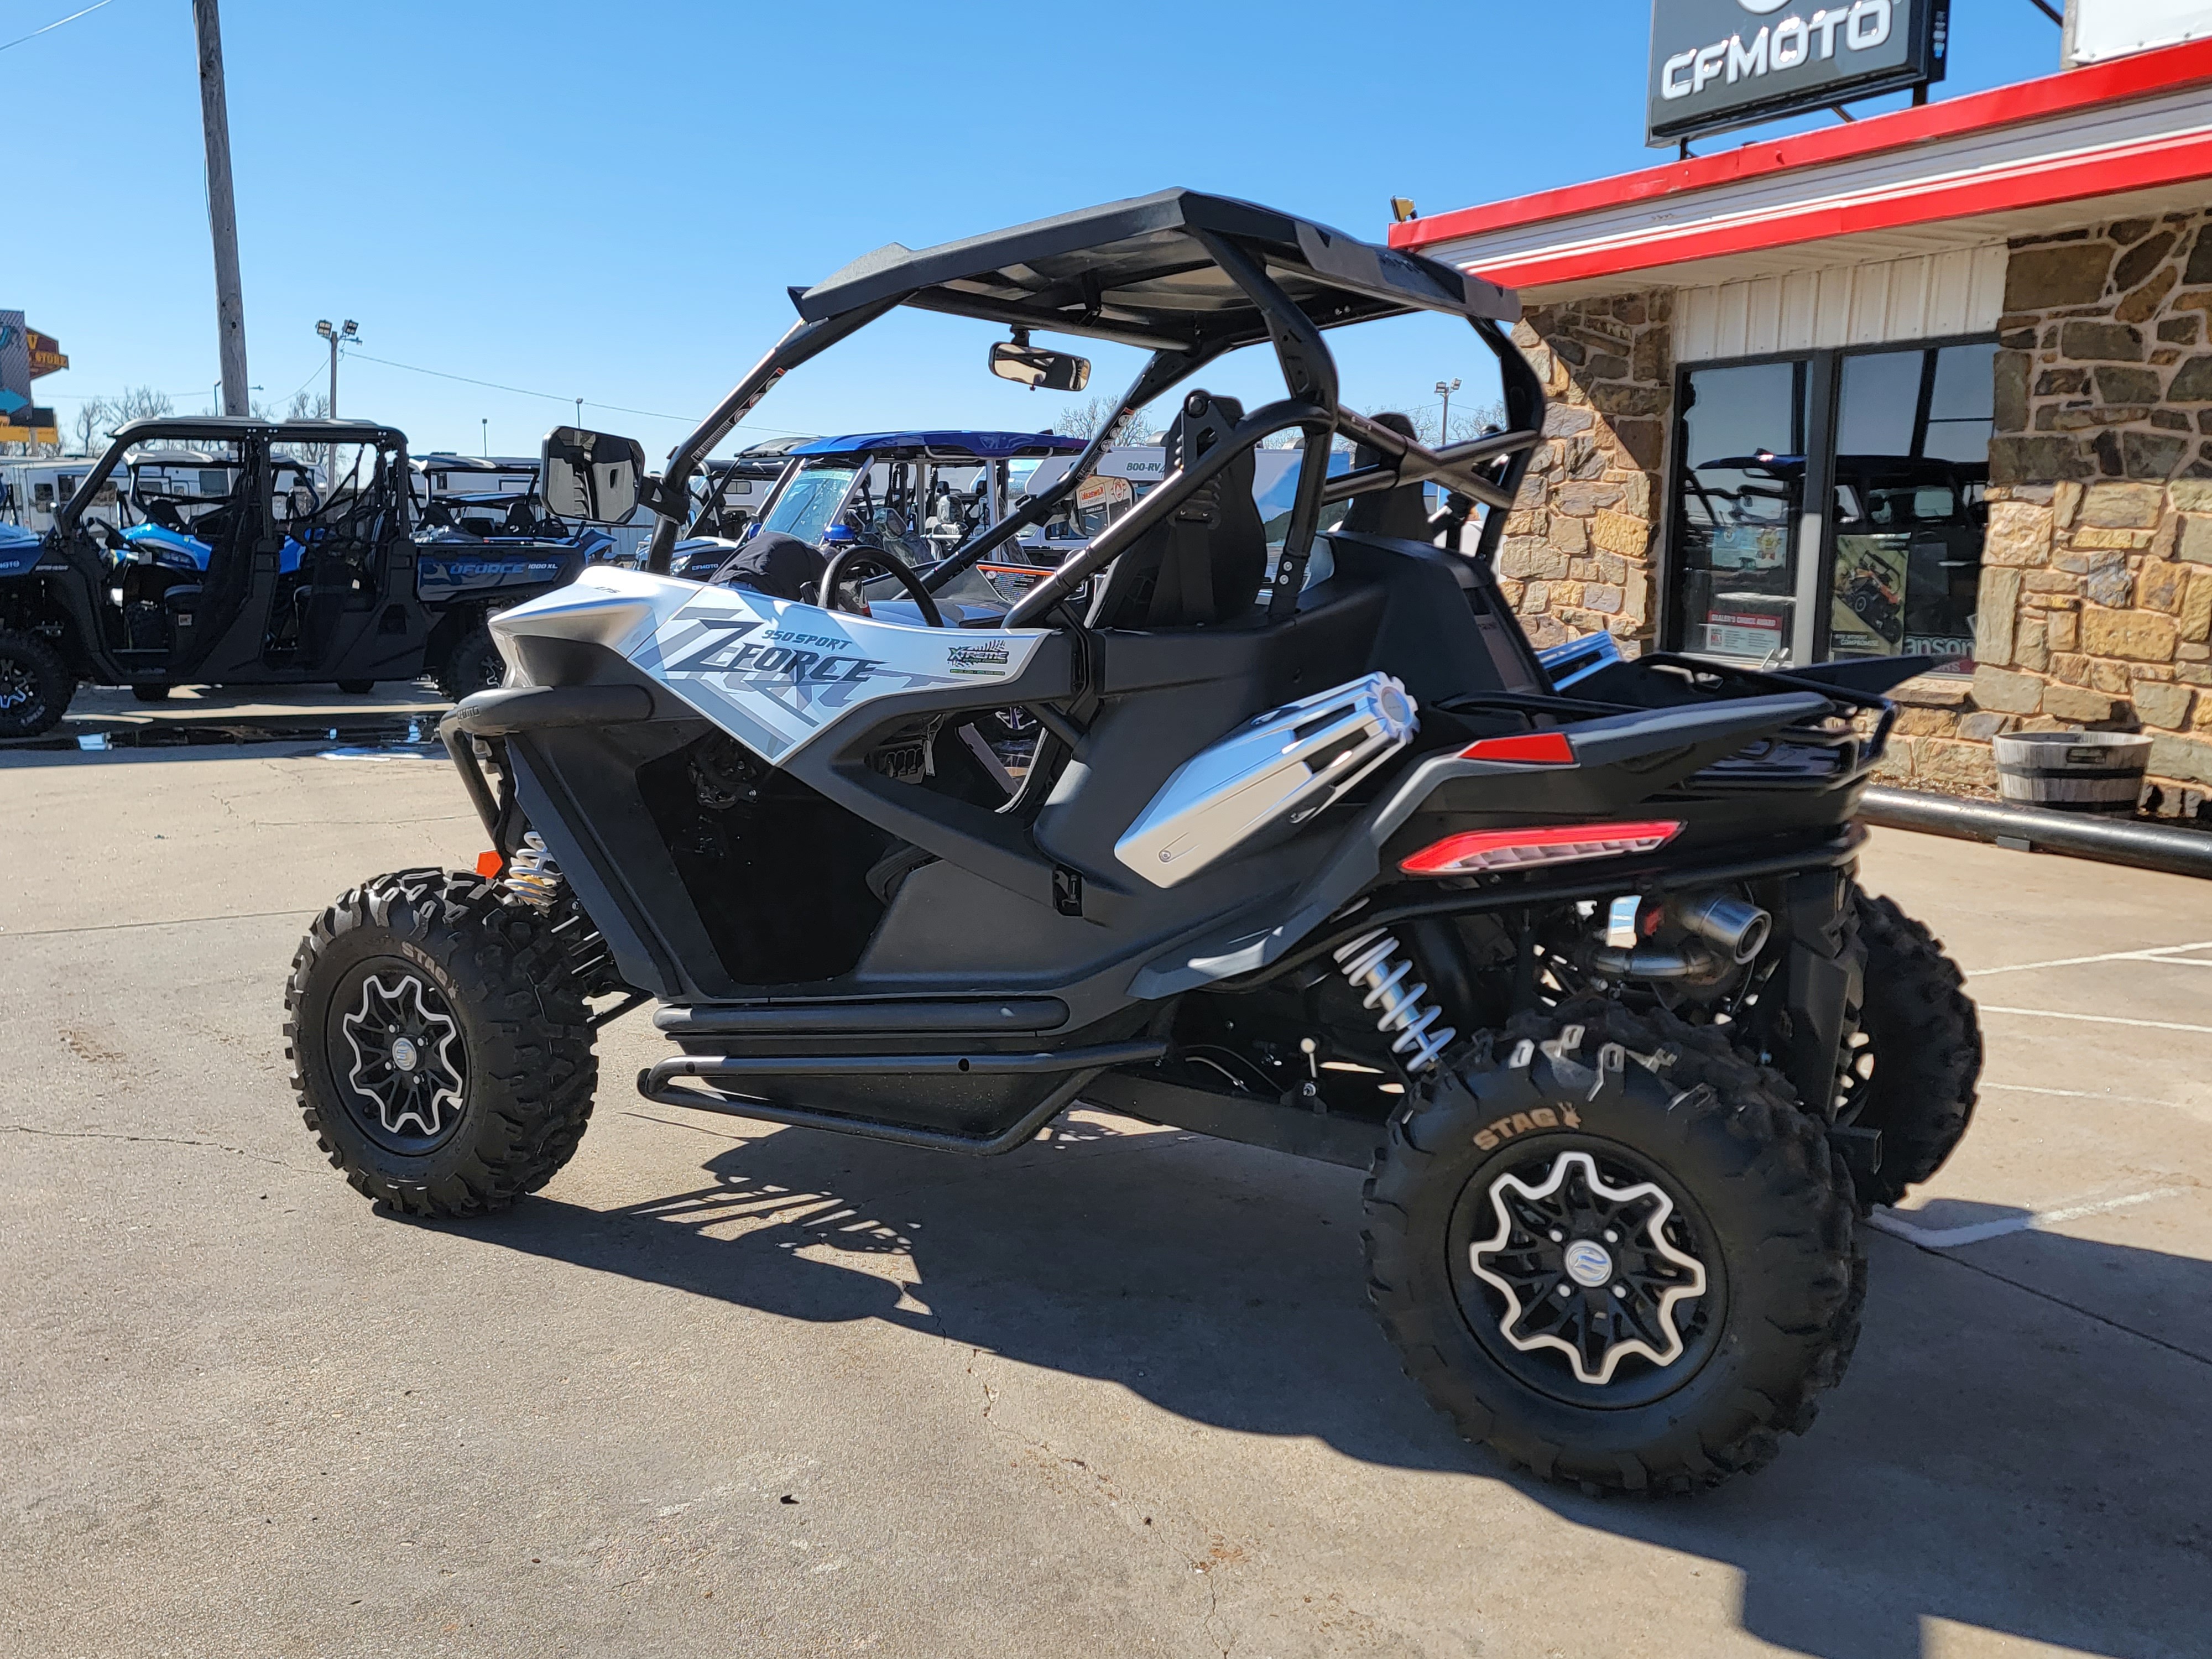 2022 CFMOTO ZFORCE 950 SPORT 950 Sport at Xtreme Outdoor Equipment